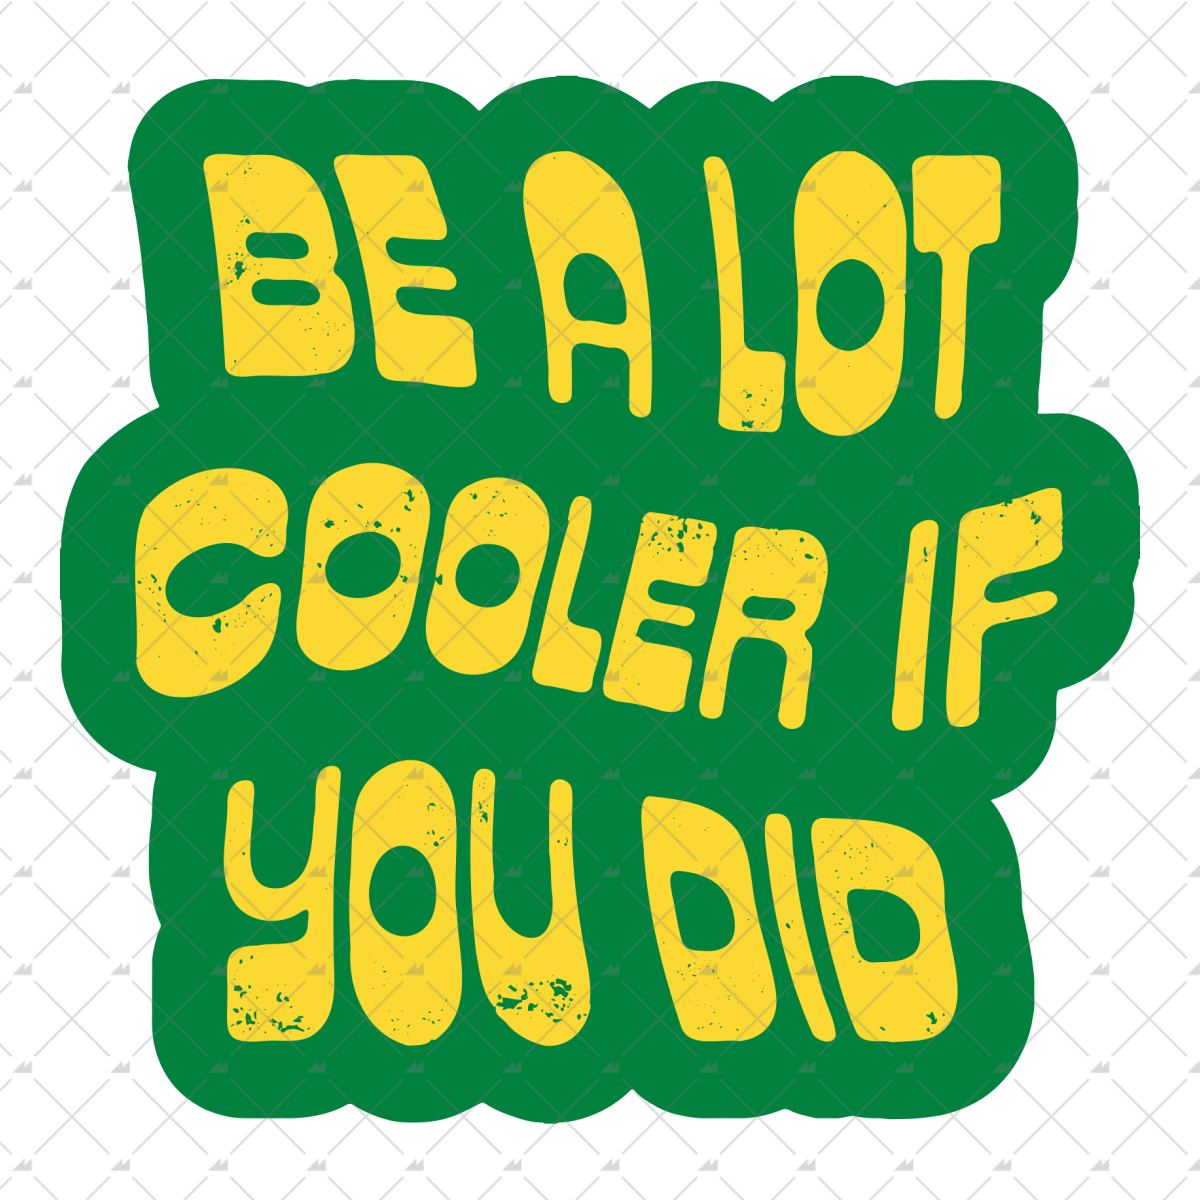 Be a Lot Cooler if You Did - Sticker